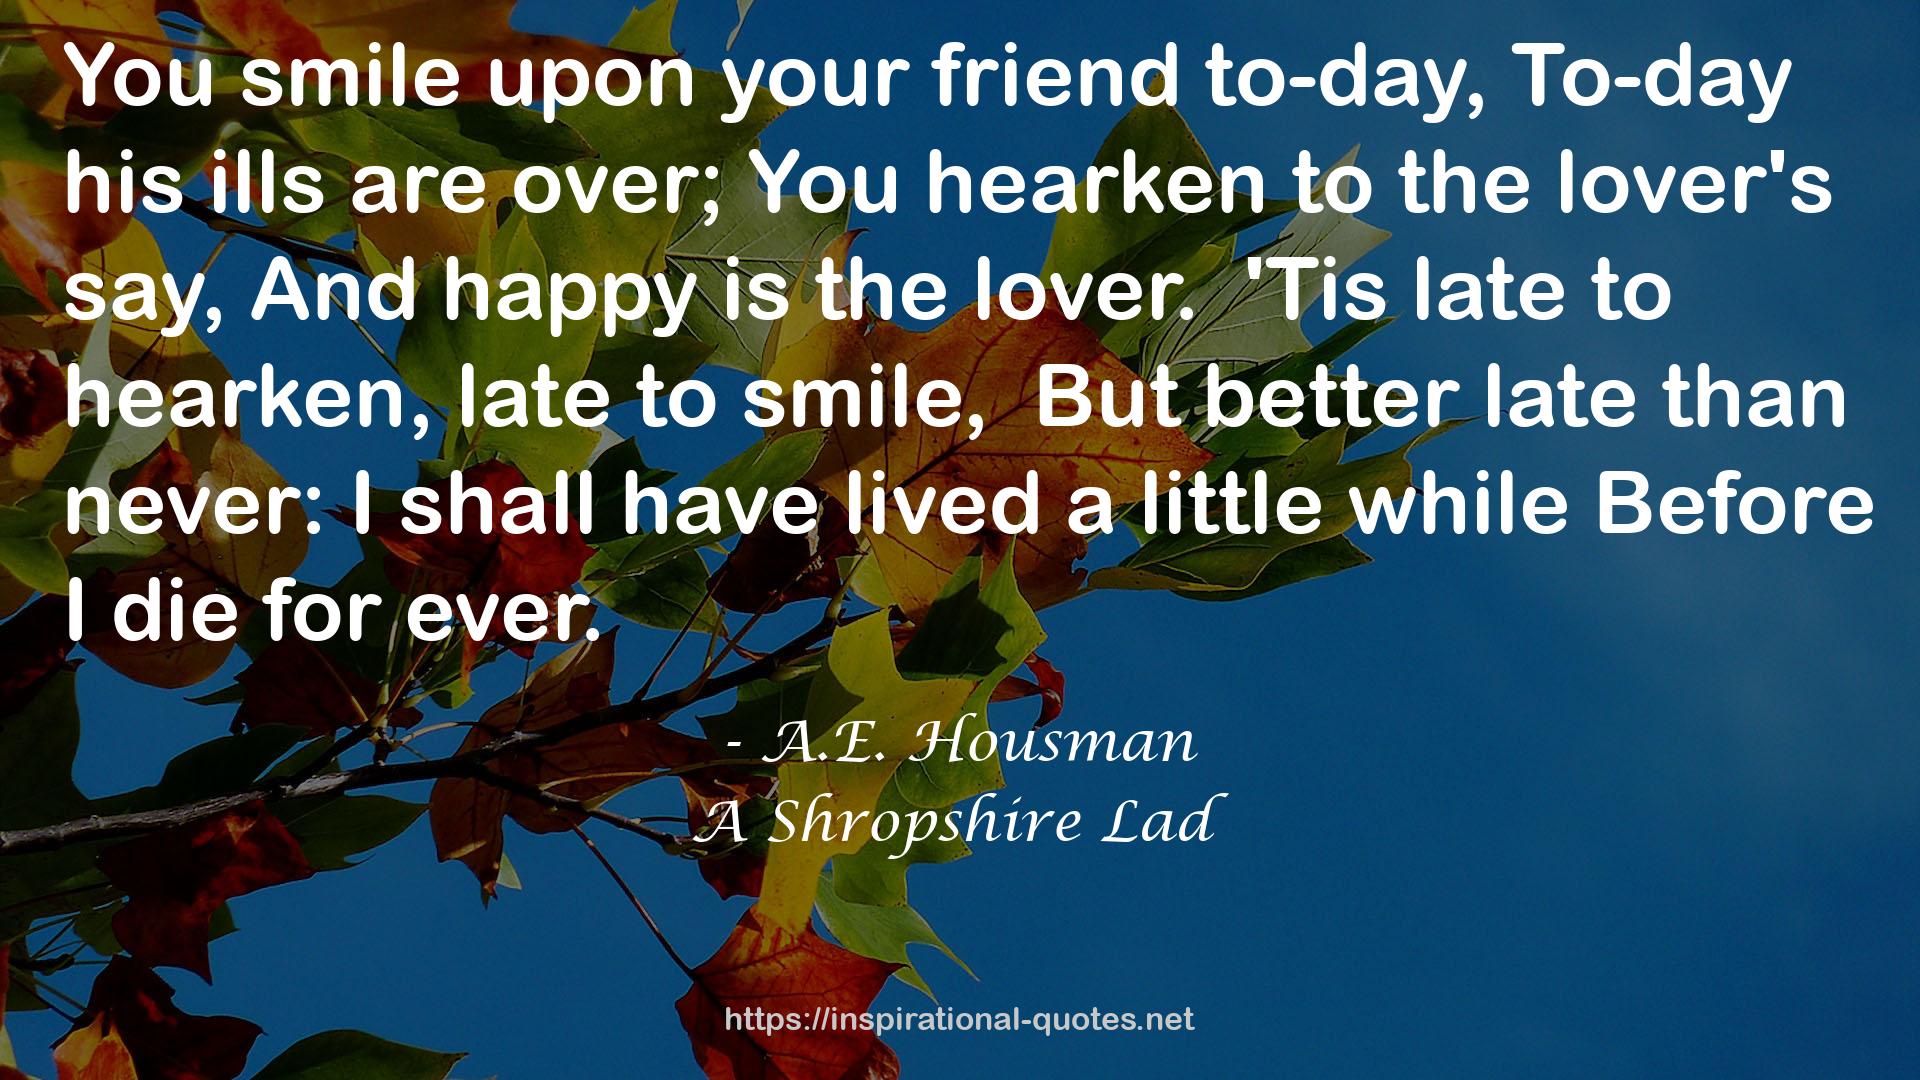 A Shropshire Lad QUOTES